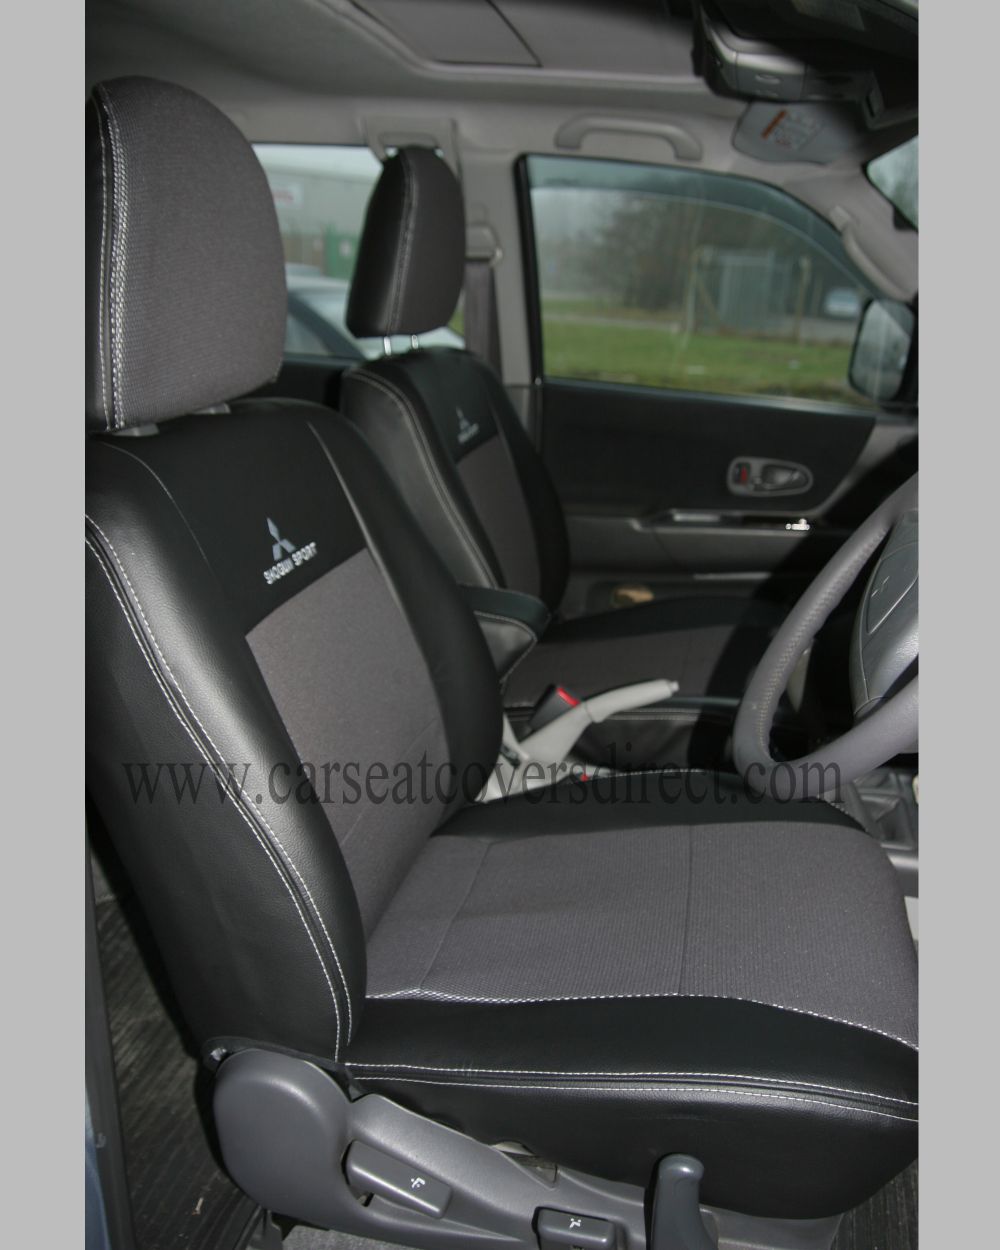 To Suit New Holland Tractor Tailored Seat Covers For Grammer Maximo Dynamic Seat and Passenger Side Seat